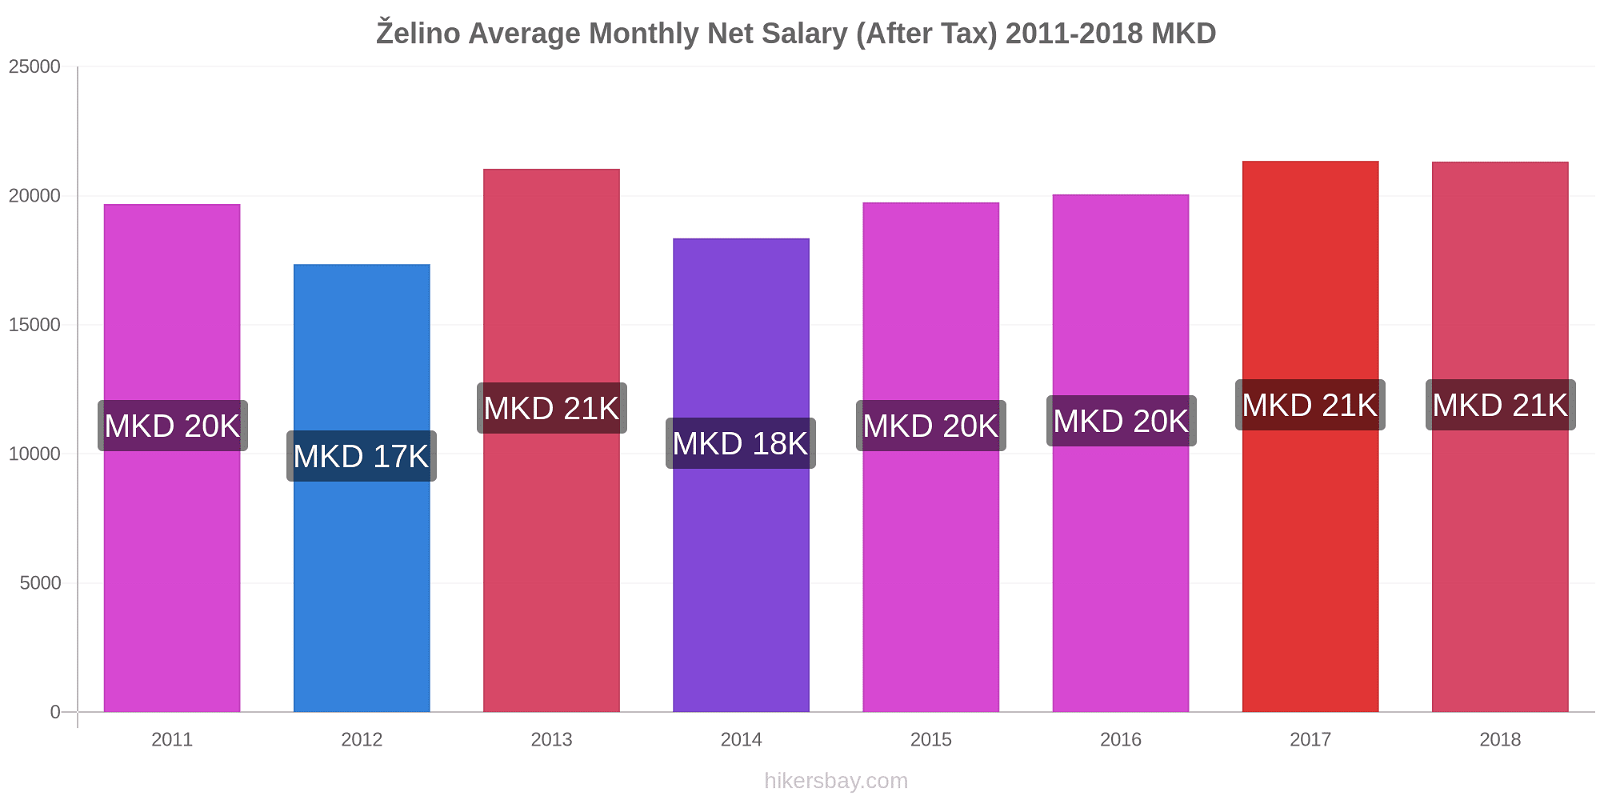 Želino price changes Average Monthly Net Salary (After Tax) hikersbay.com